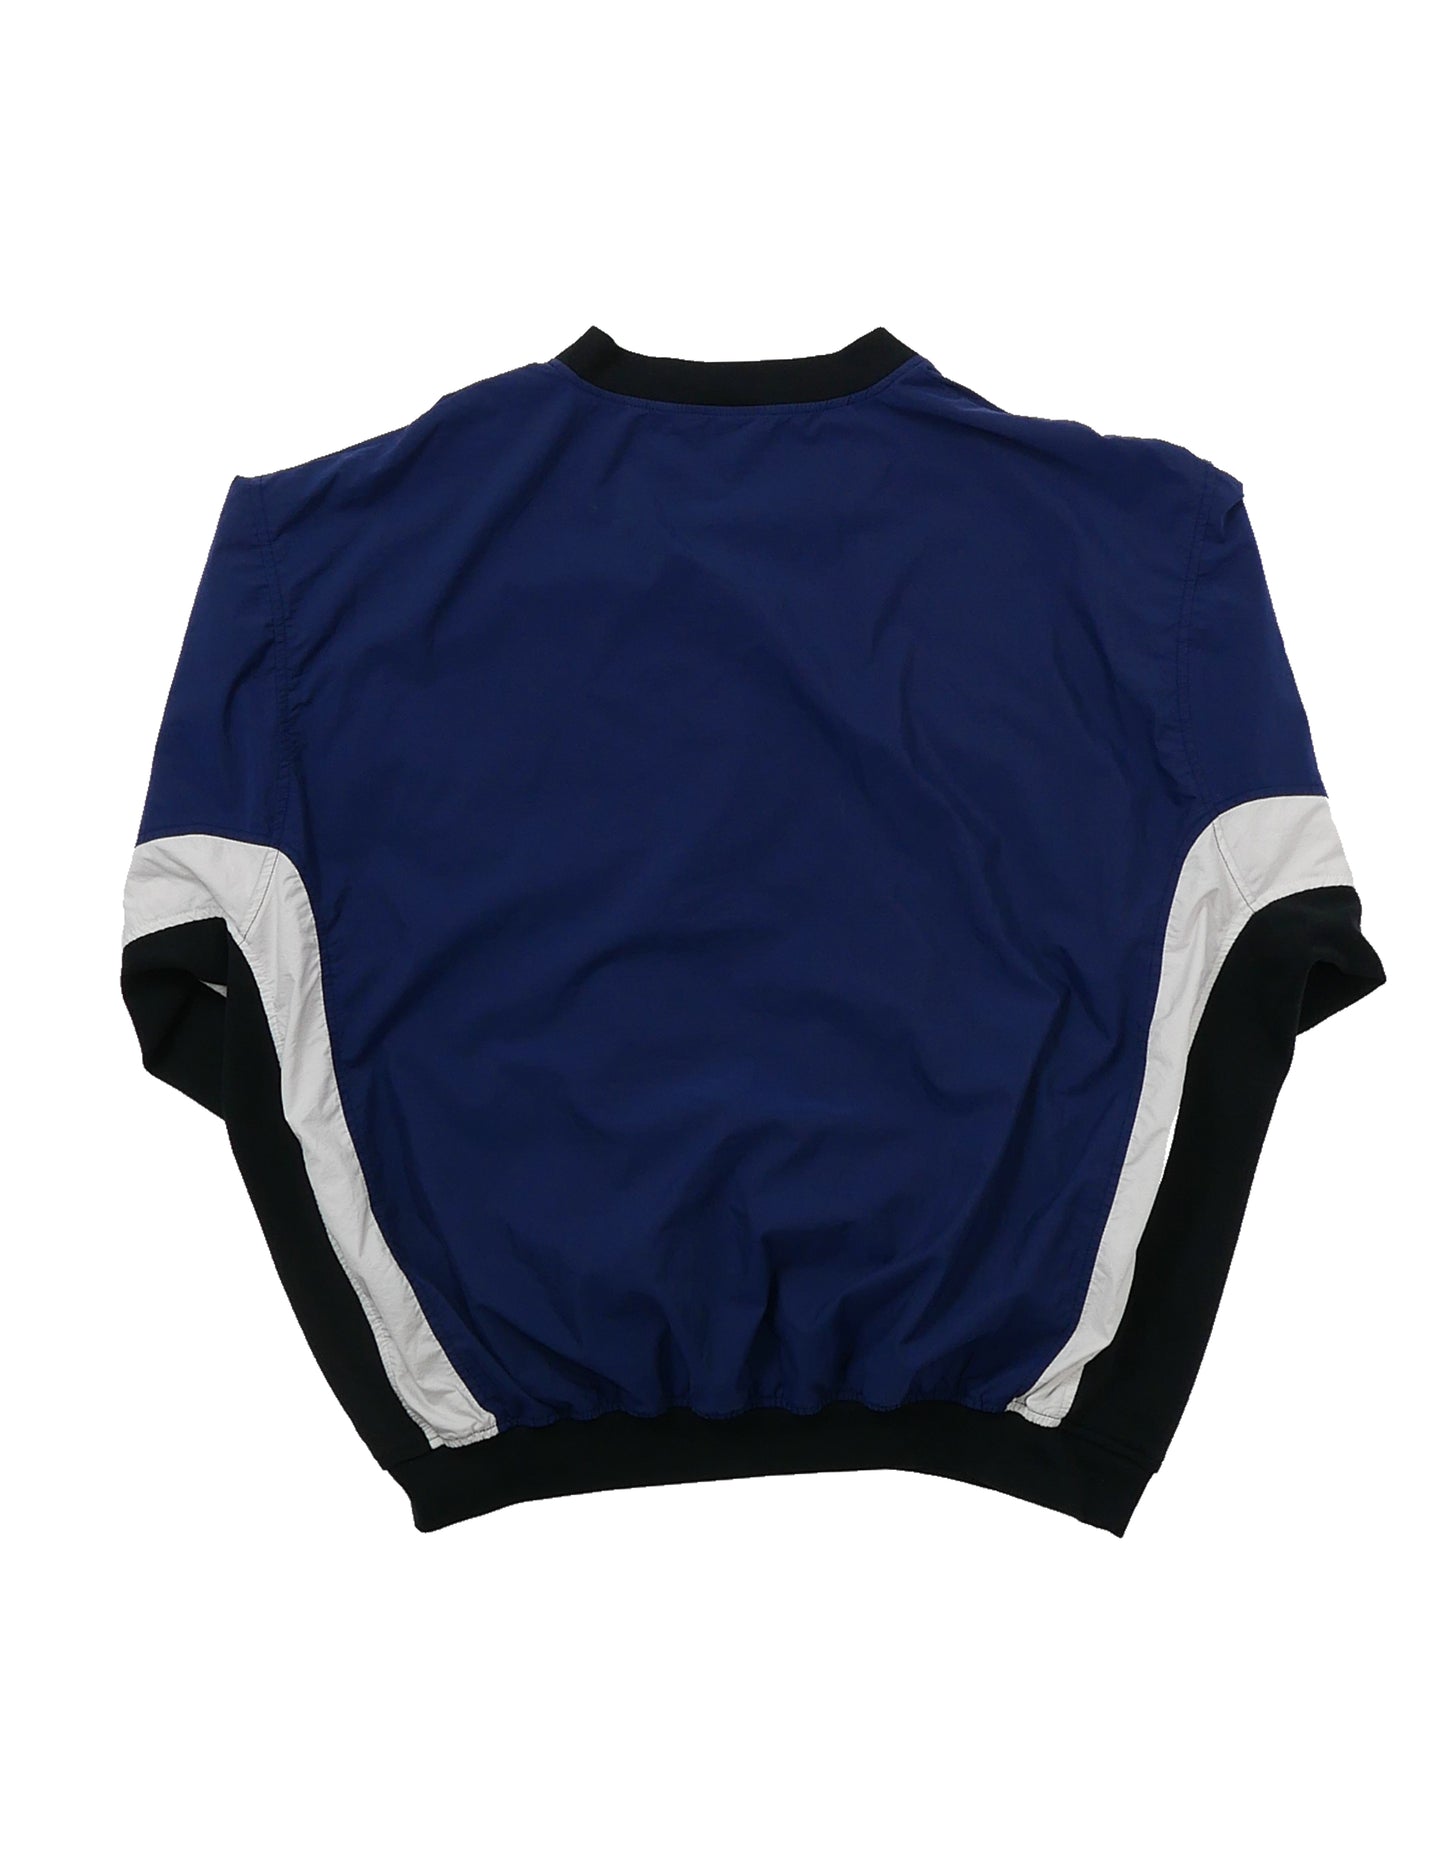 ADIDAS / 90’s Pullover Top -L～XL-